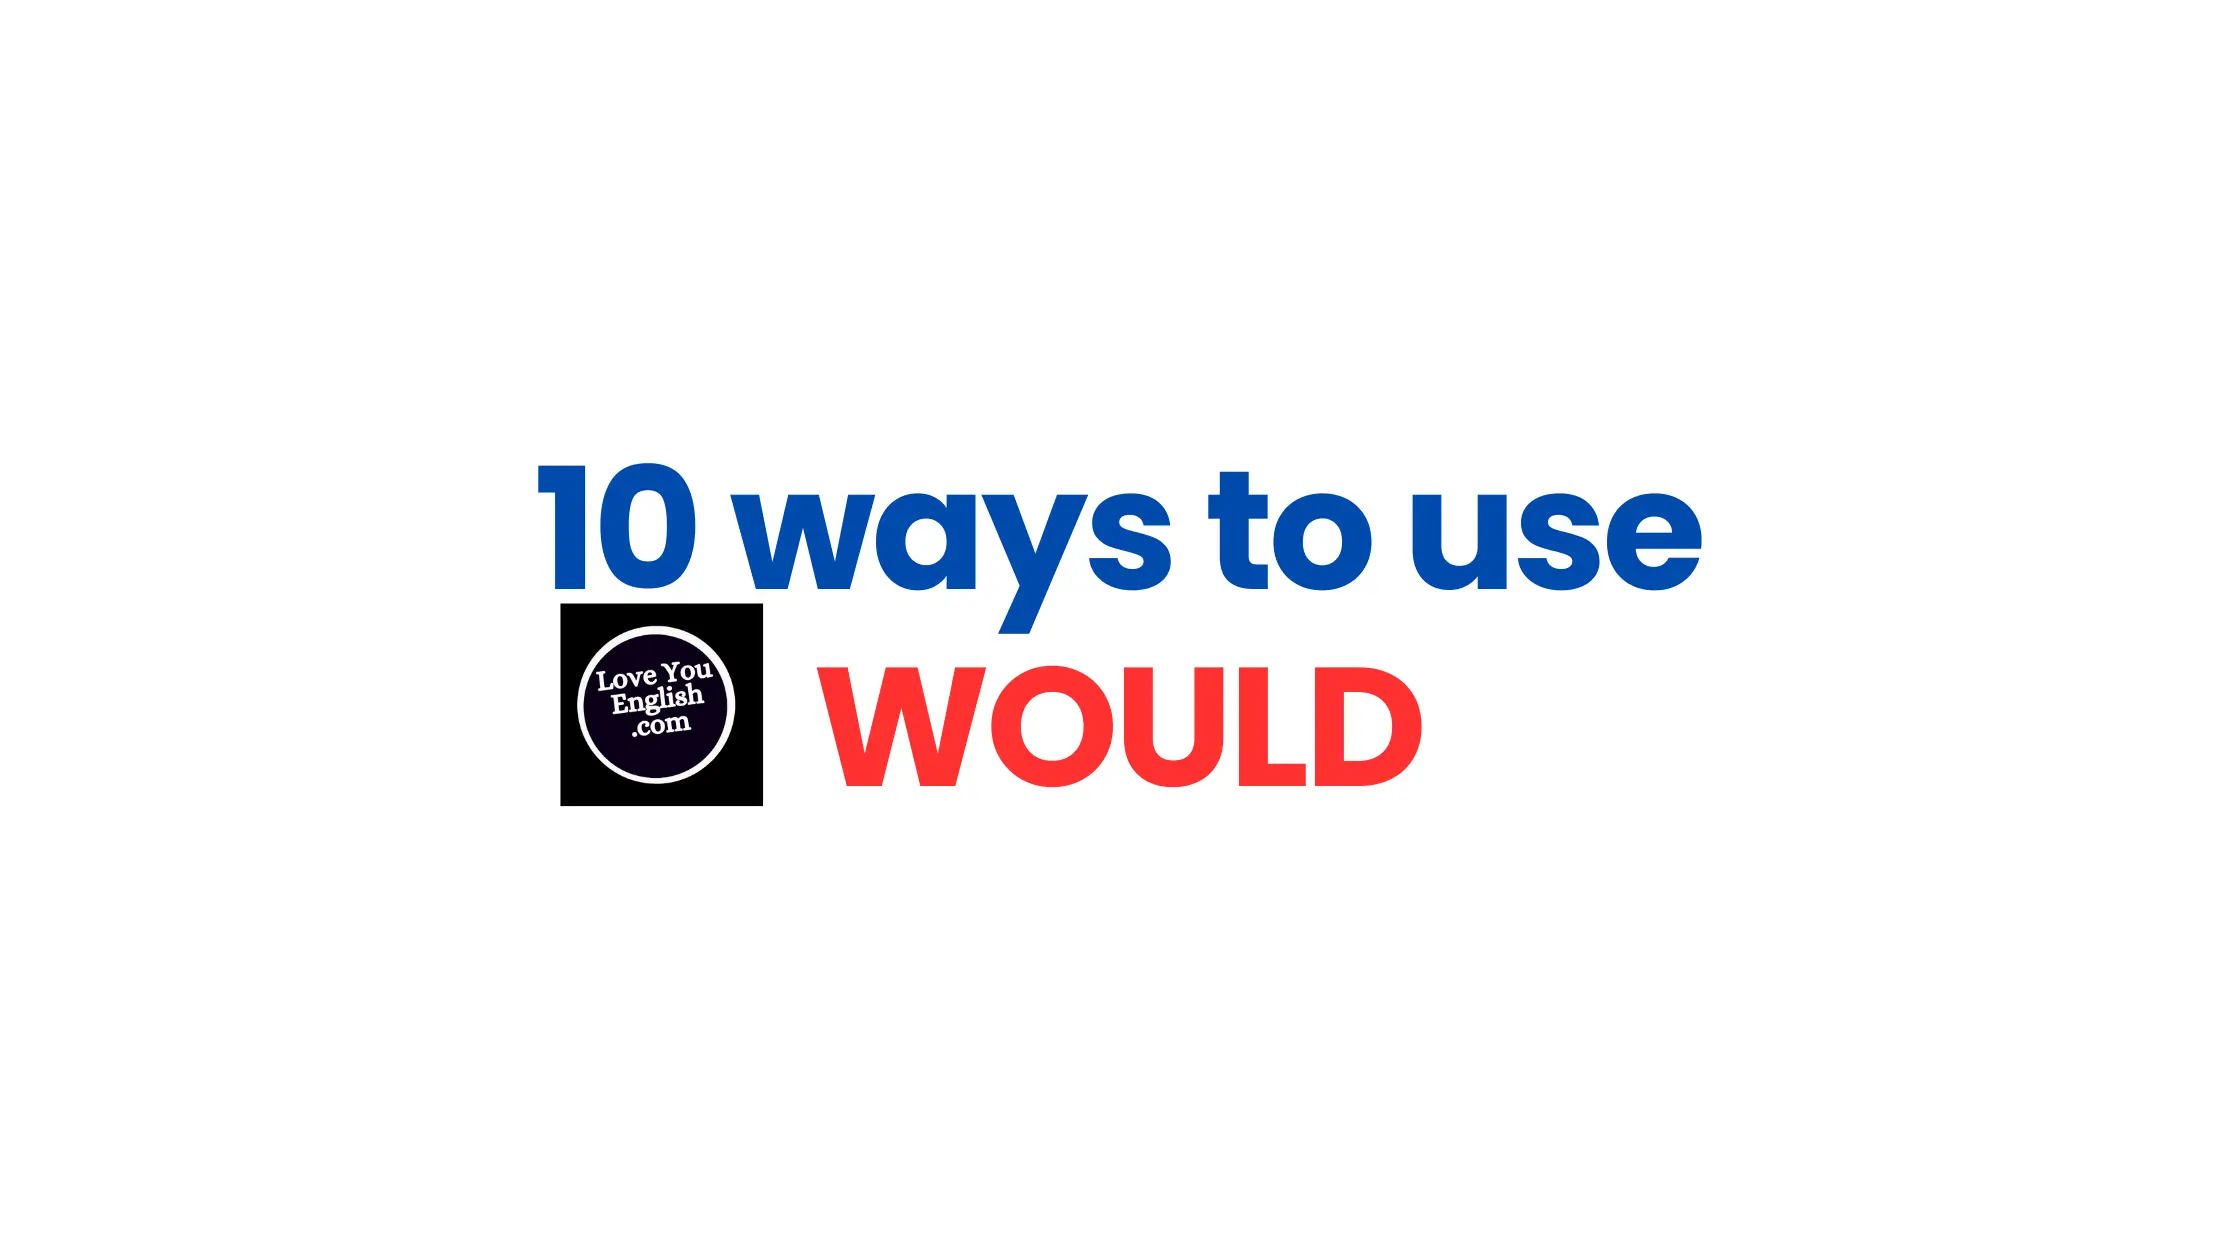 10 ways to use the word WOULD